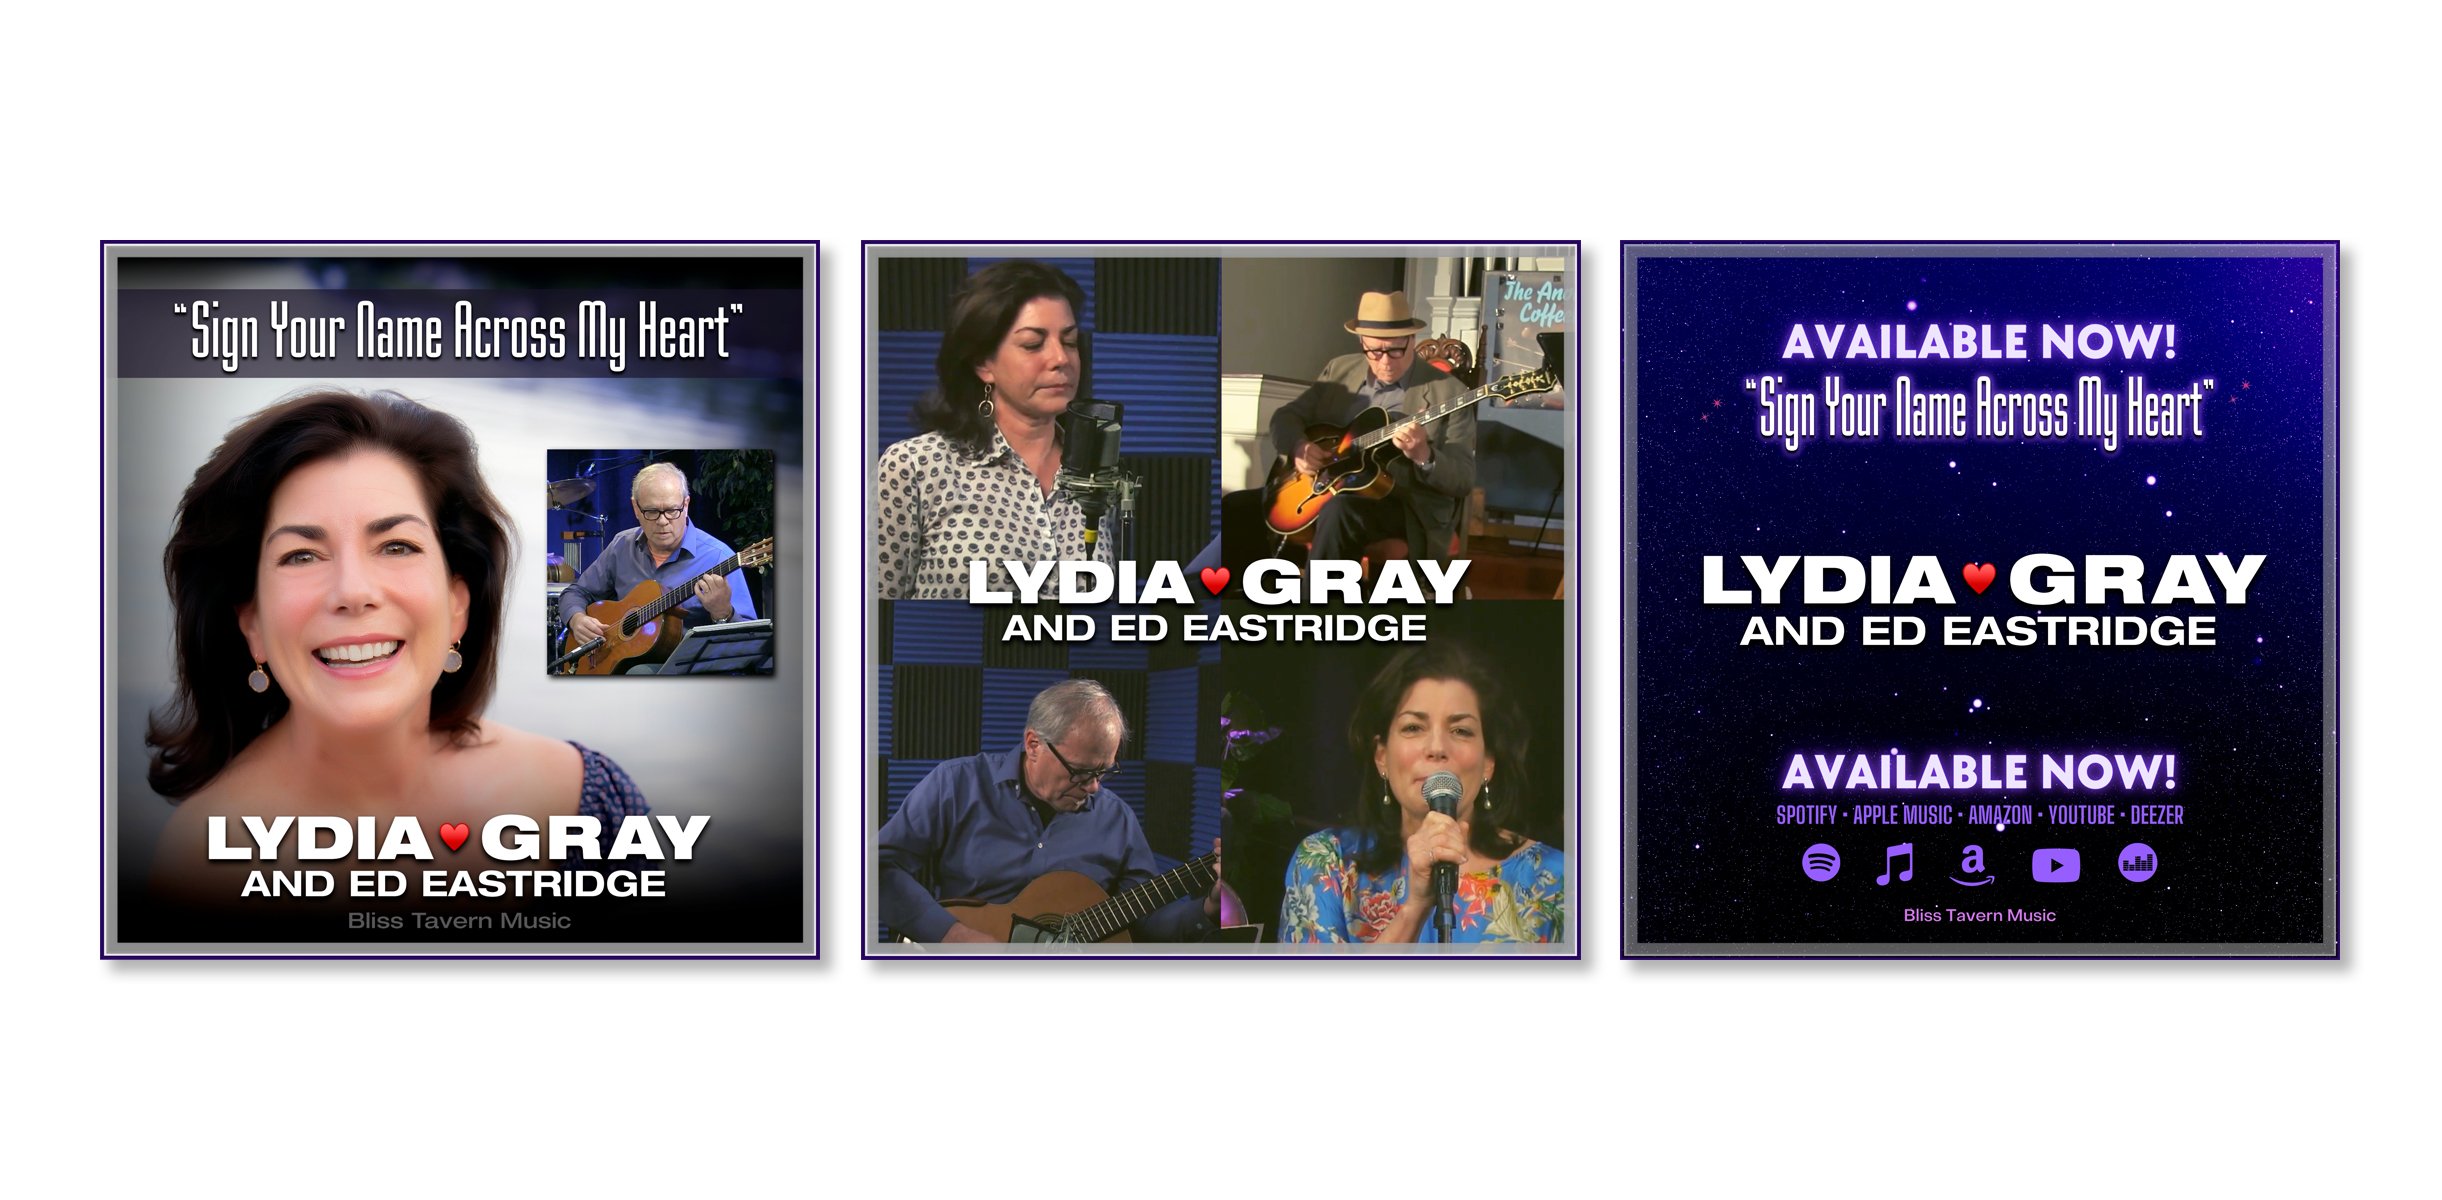 Design for Marketing Musical Artist Lydia Gray by SP STUDIOS.